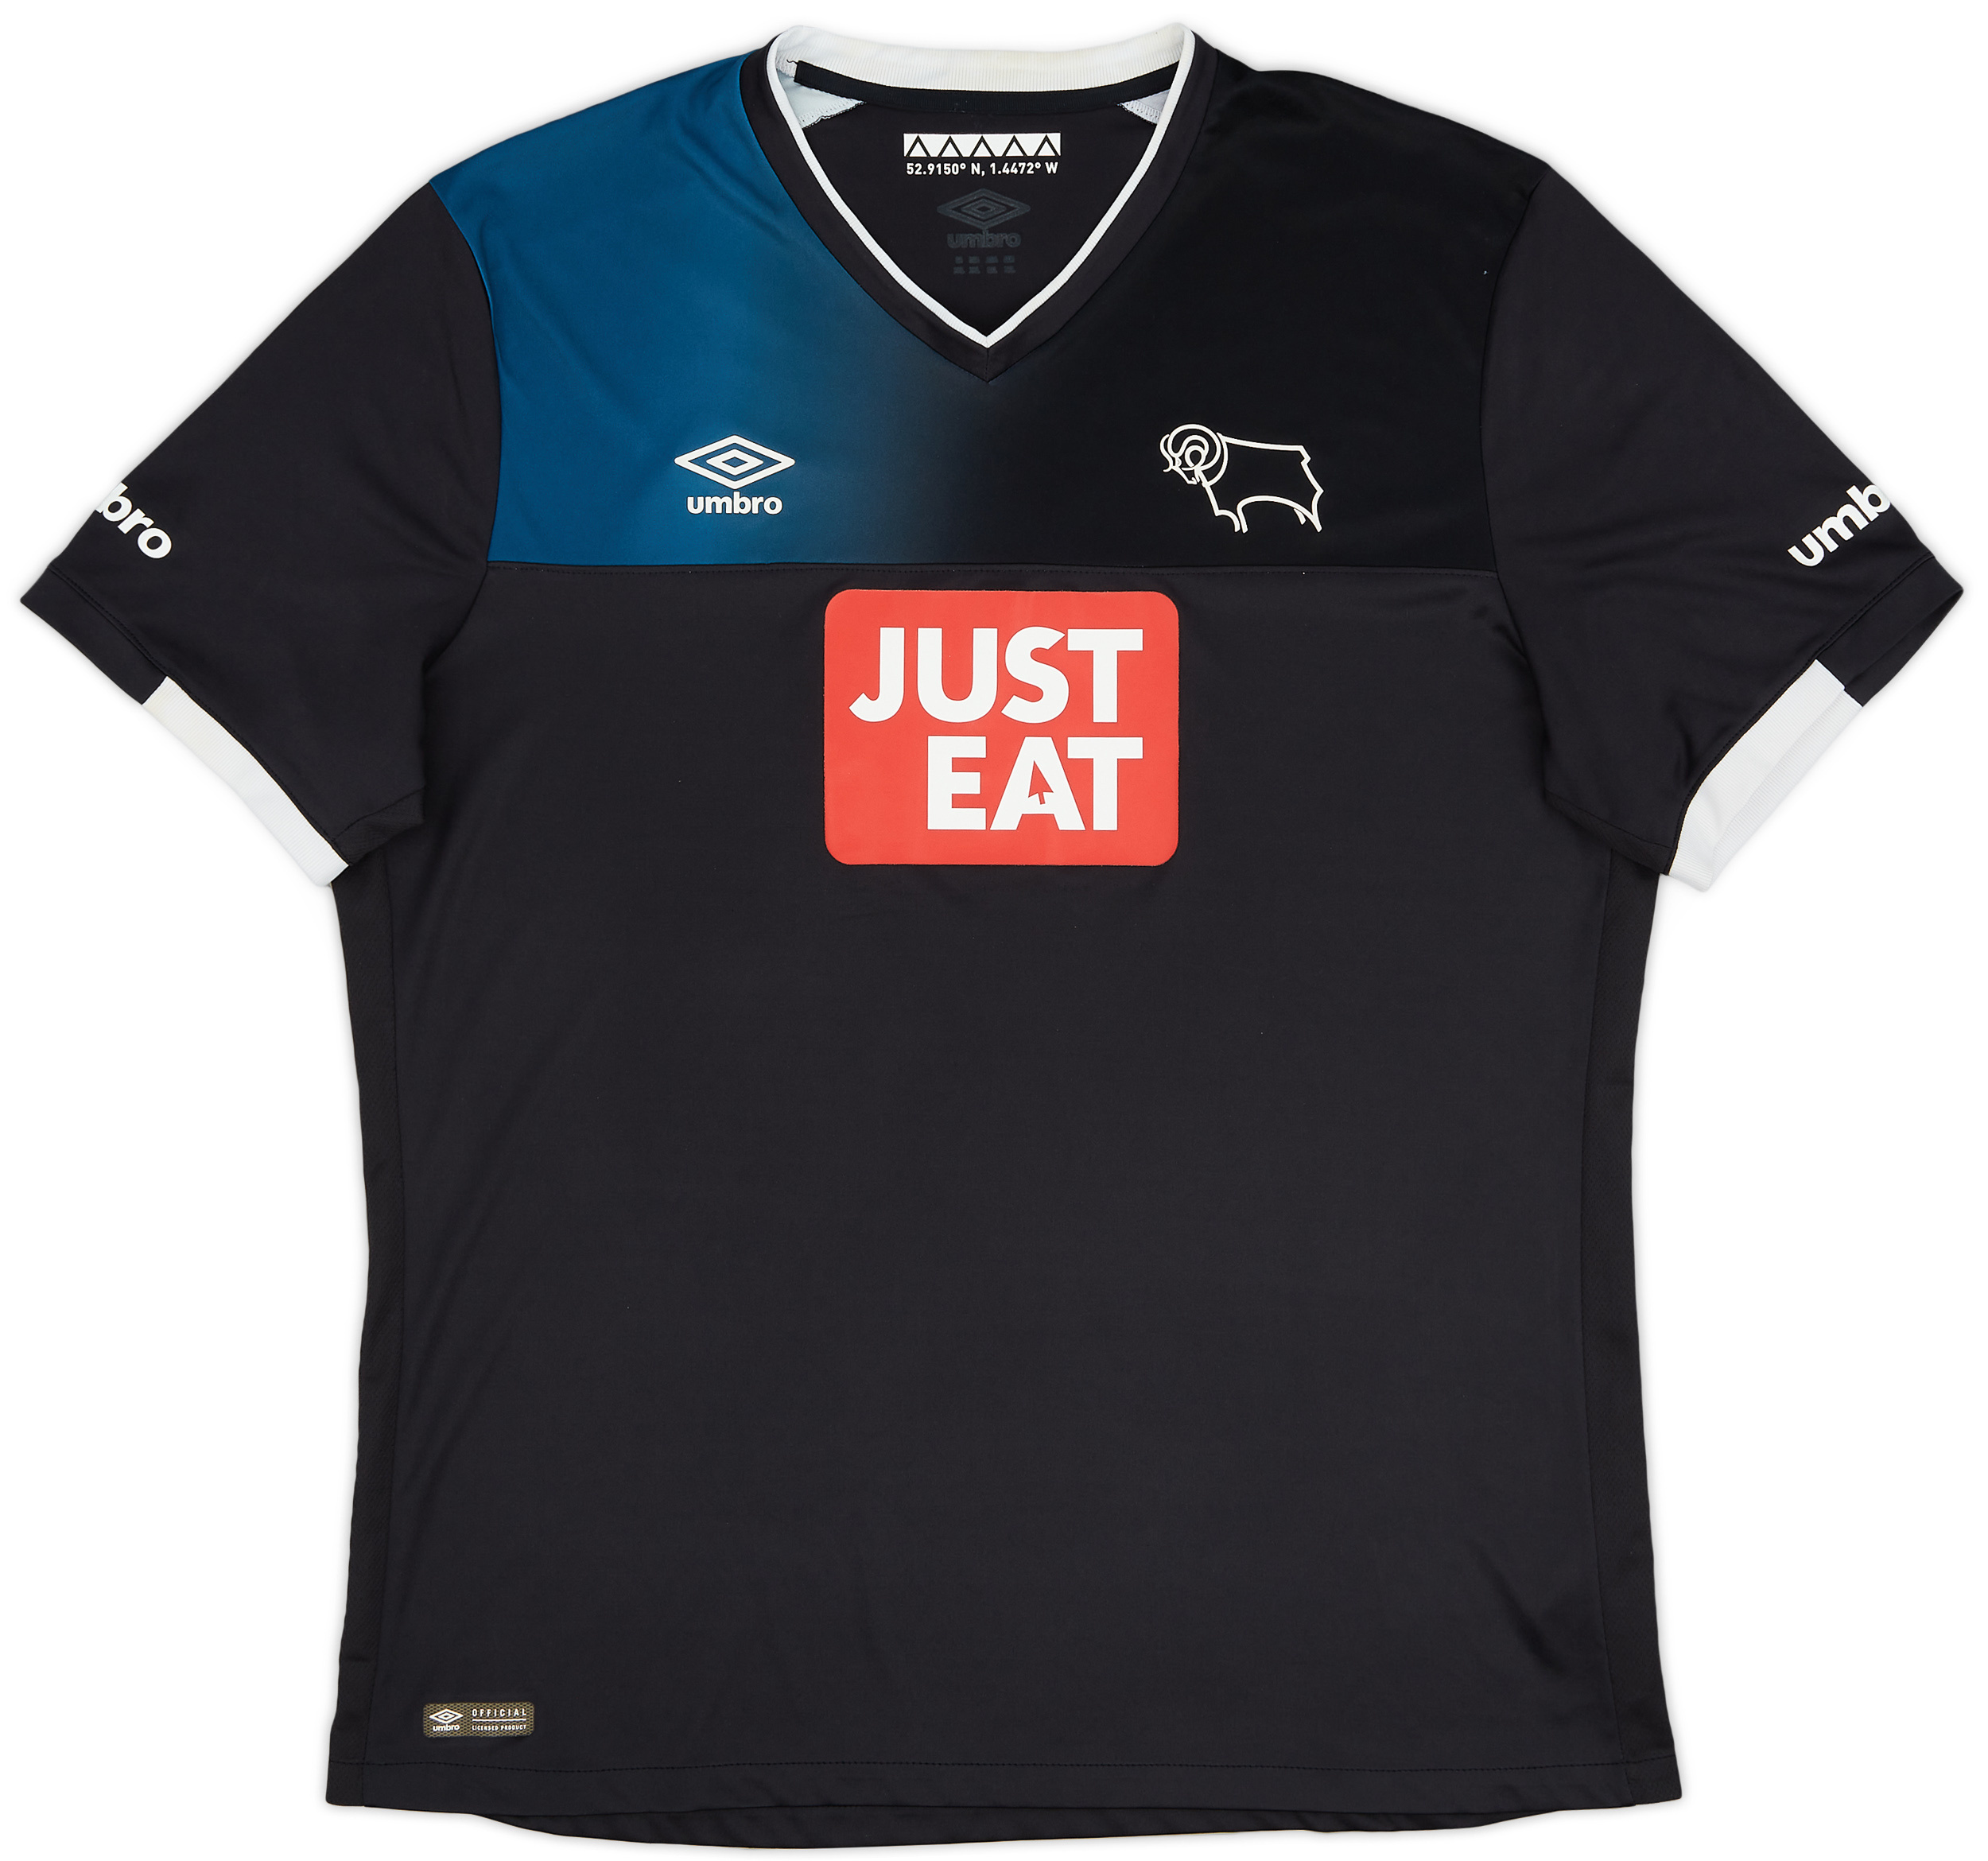 2016-17 Derby County Away Shirt - 9/10 - ()